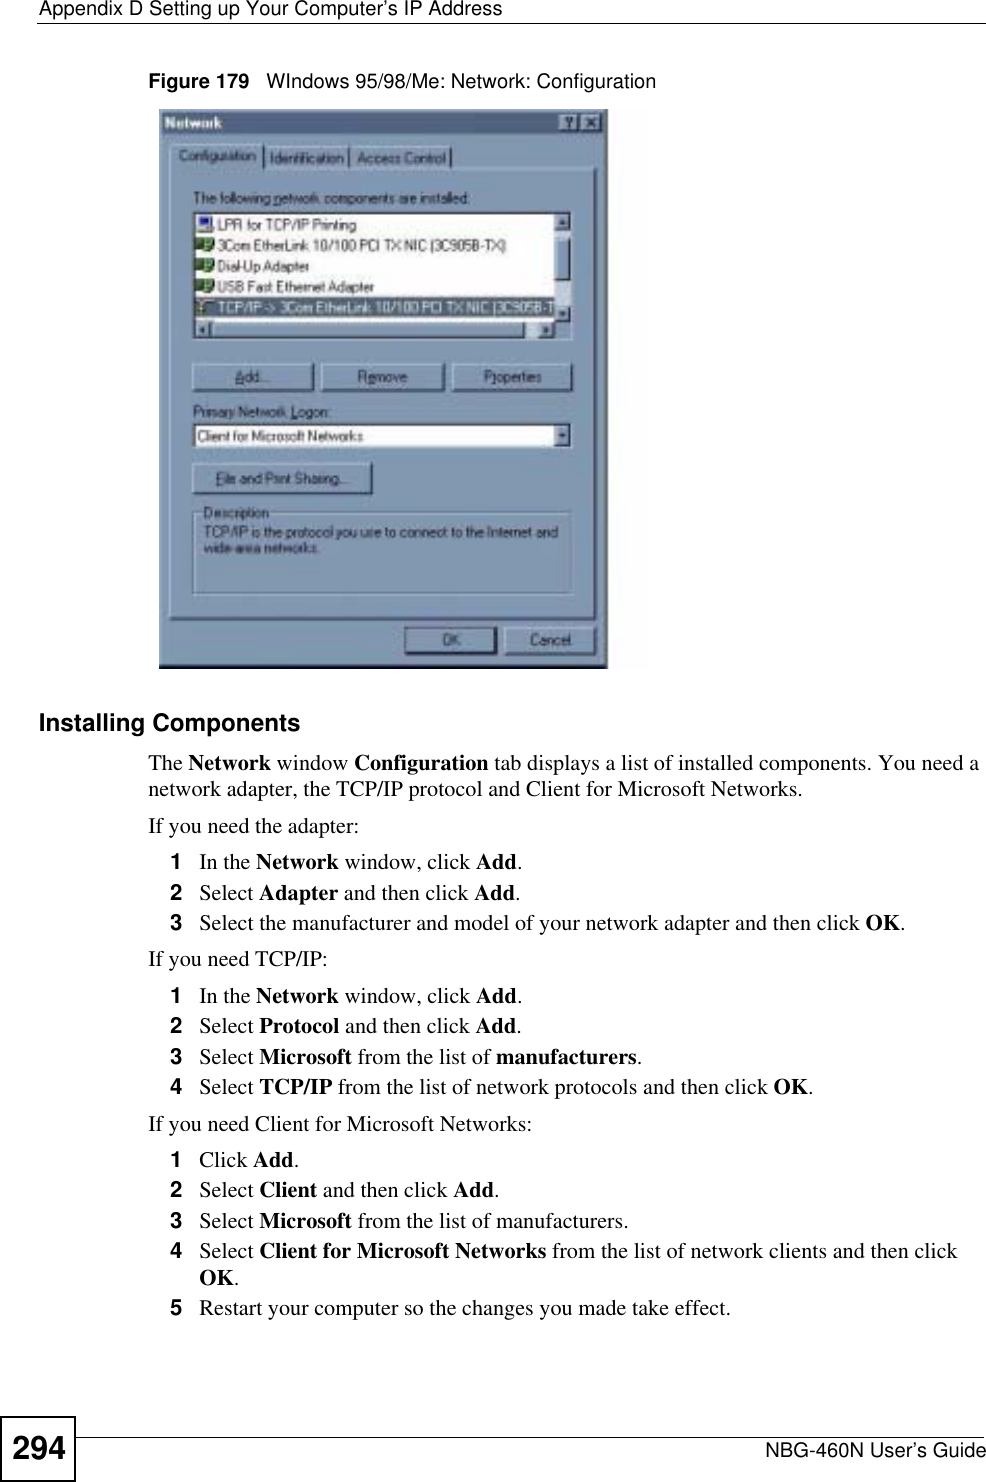 Appendix D Setting up Your Computer’s IP AddressNBG-460N User’s Guide294Figure 179   WIndows 95/98/Me: Network: ConfigurationInstalling ComponentsThe Network window Configuration tab displays a list of installed components. You need a network adapter, the TCP/IP protocol and Client for Microsoft Networks.If you need the adapter:1In the Network window, click Add.2Select Adapter and then click Add.3Select the manufacturer and model of your network adapter and then click OK.If you need TCP/IP:1In the Network window, click Add.2Select Protocol and then click Add.3Select Microsoft from the list of manufacturers.4Select TCP/IP from the list of network protocols and then click OK.If you need Client for Microsoft Networks:1Click Add.2Select Client and then click Add.3Select Microsoft from the list of manufacturers.4Select Client for Microsoft Networks from the list of network clients and then click OK.5Restart your computer so the changes you made take effect.